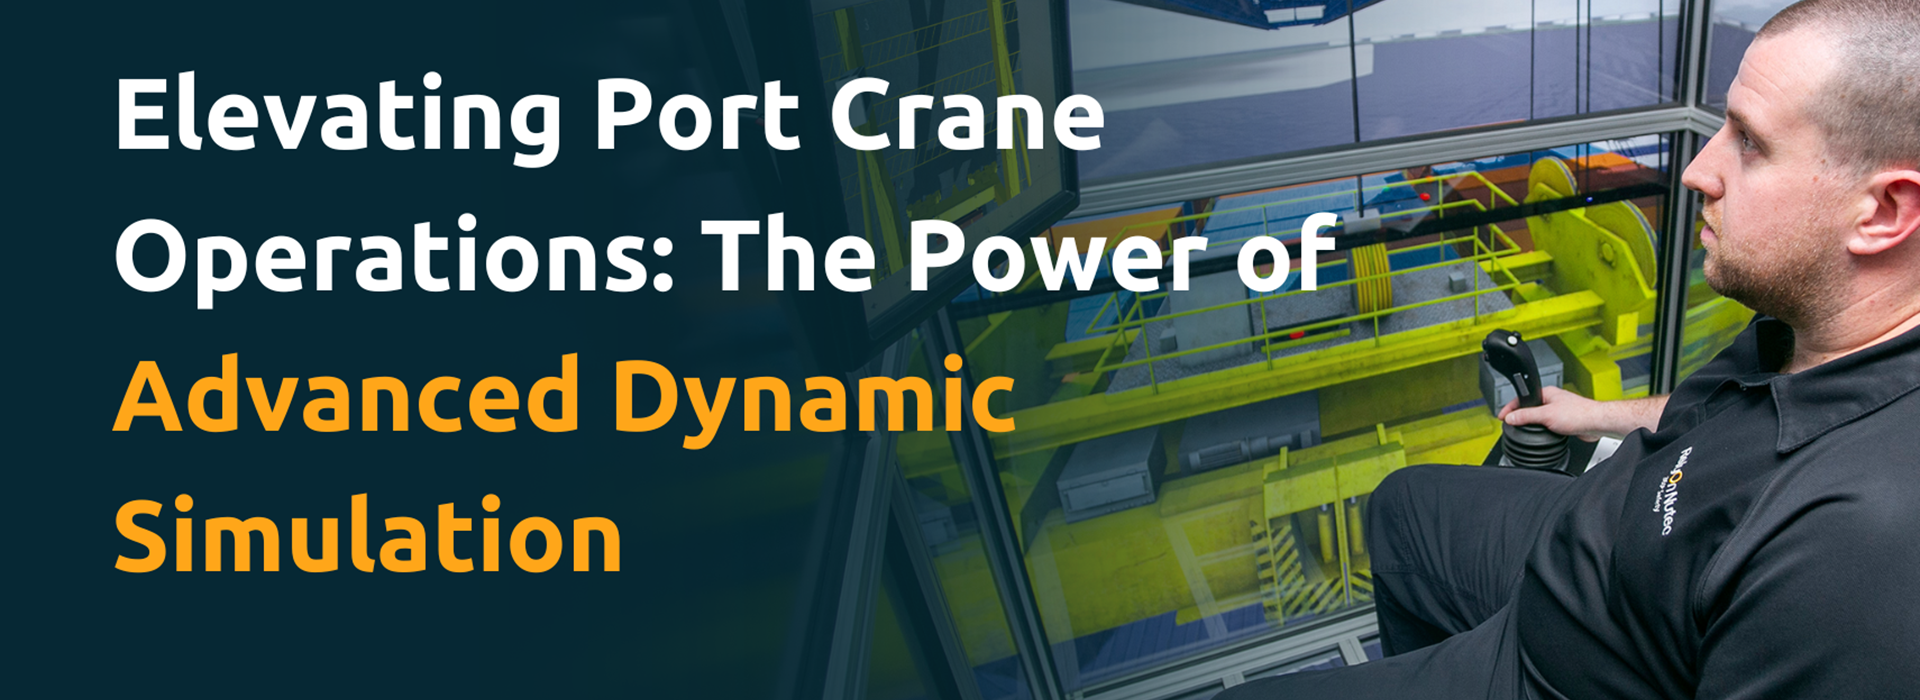 Elevating Port Crane Operations The Power Of Advanced Dynamic Simulation Article Thumbnail